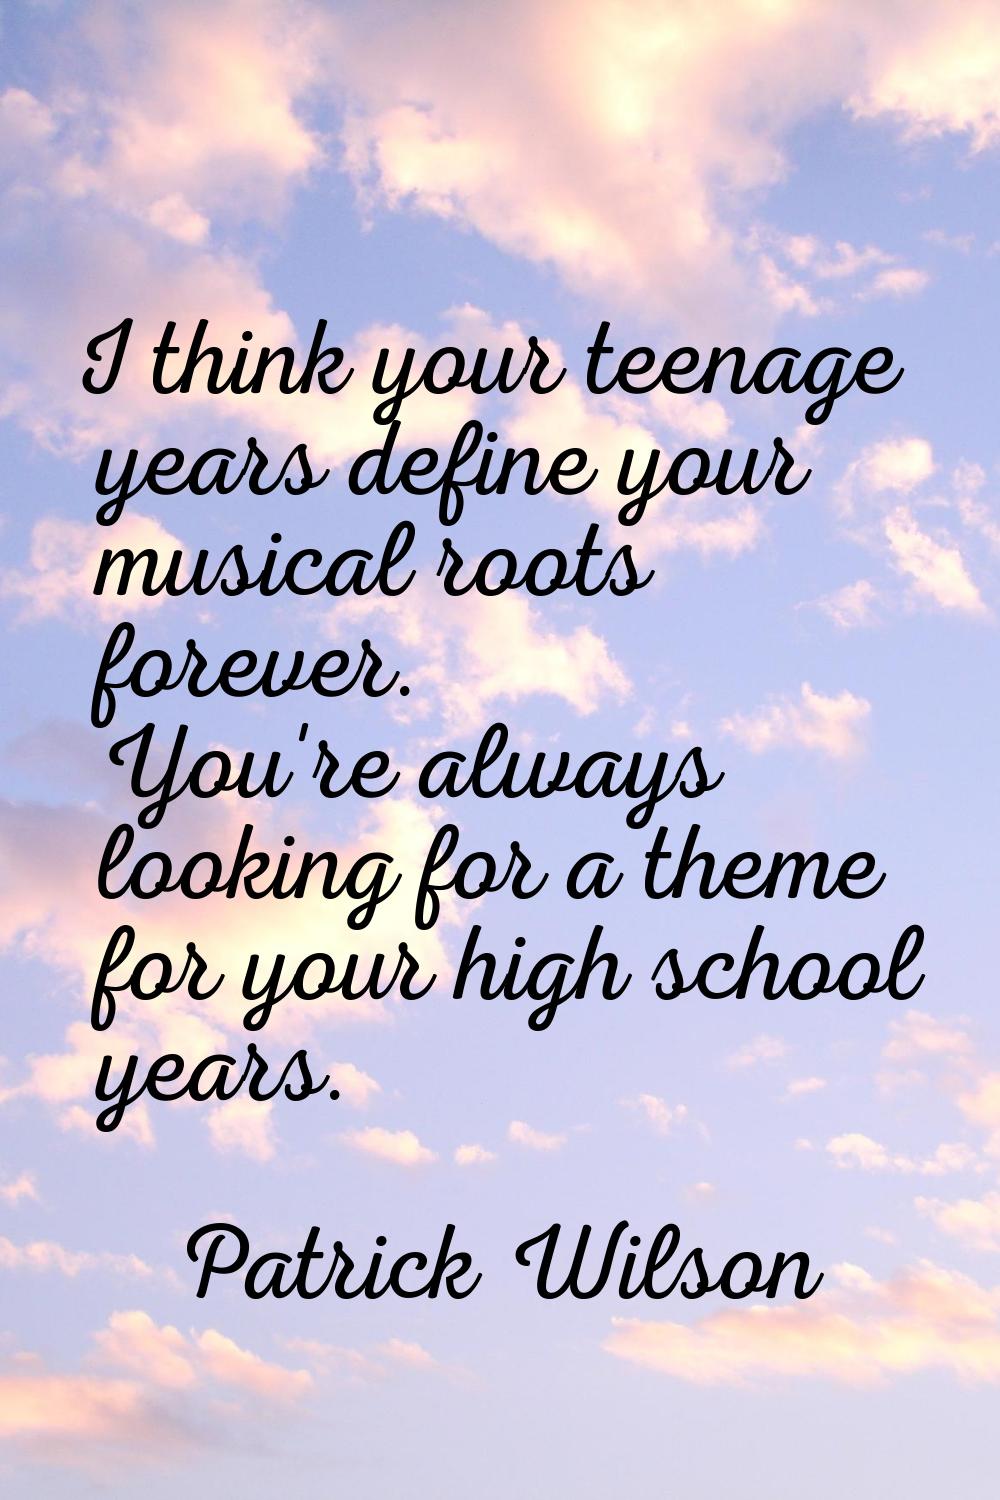 I think your teenage years define your musical roots forever. You're always looking for a theme for